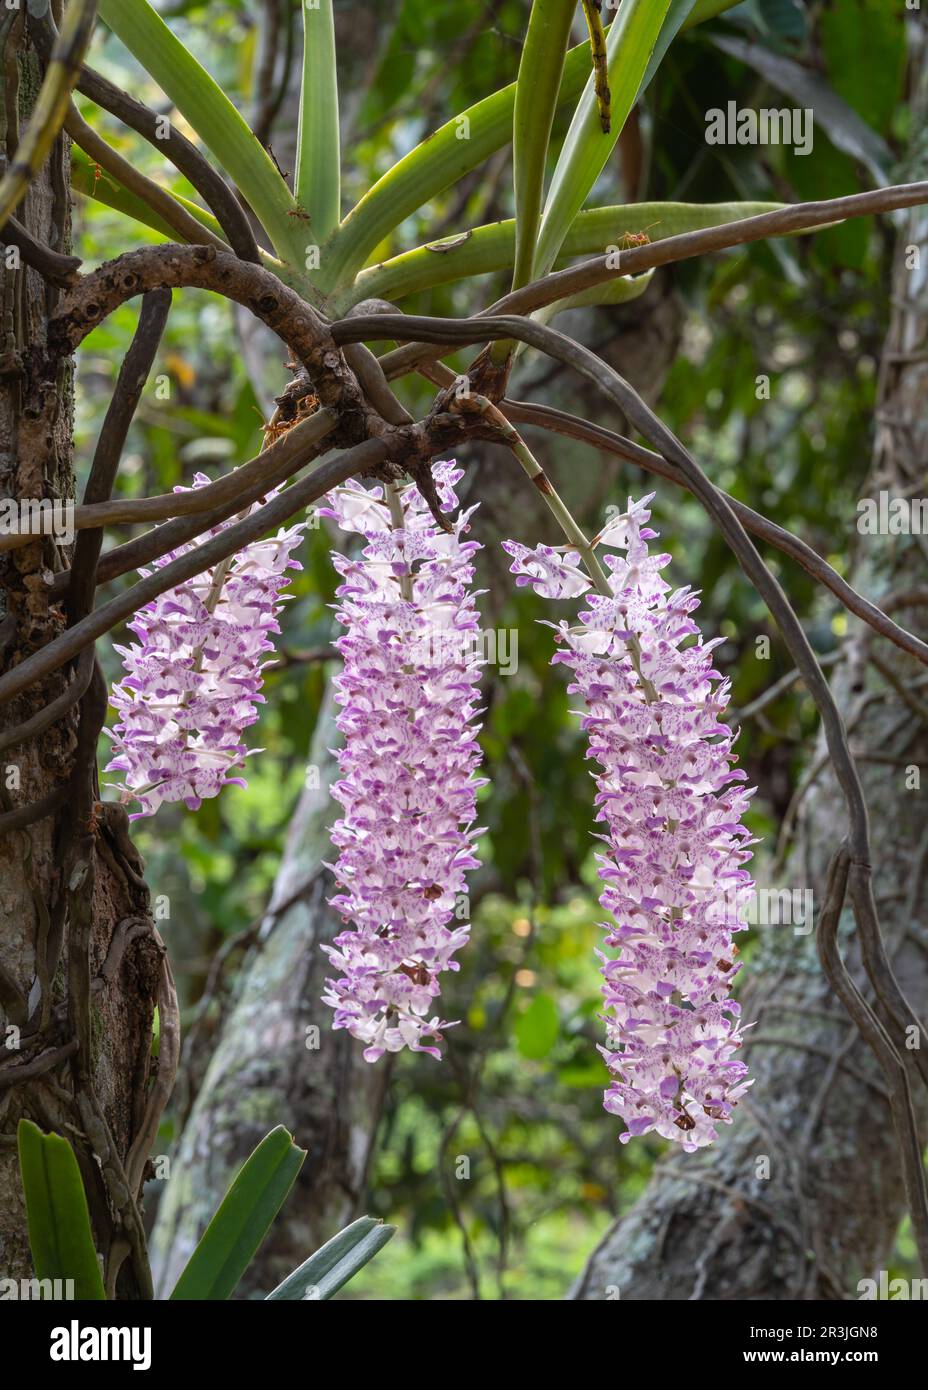 Closeup view of backlit white and purple clusters of flowers of rhynchostylis retusa epiphytic orchid species blooming outdoors in tropical garden Stock Photo